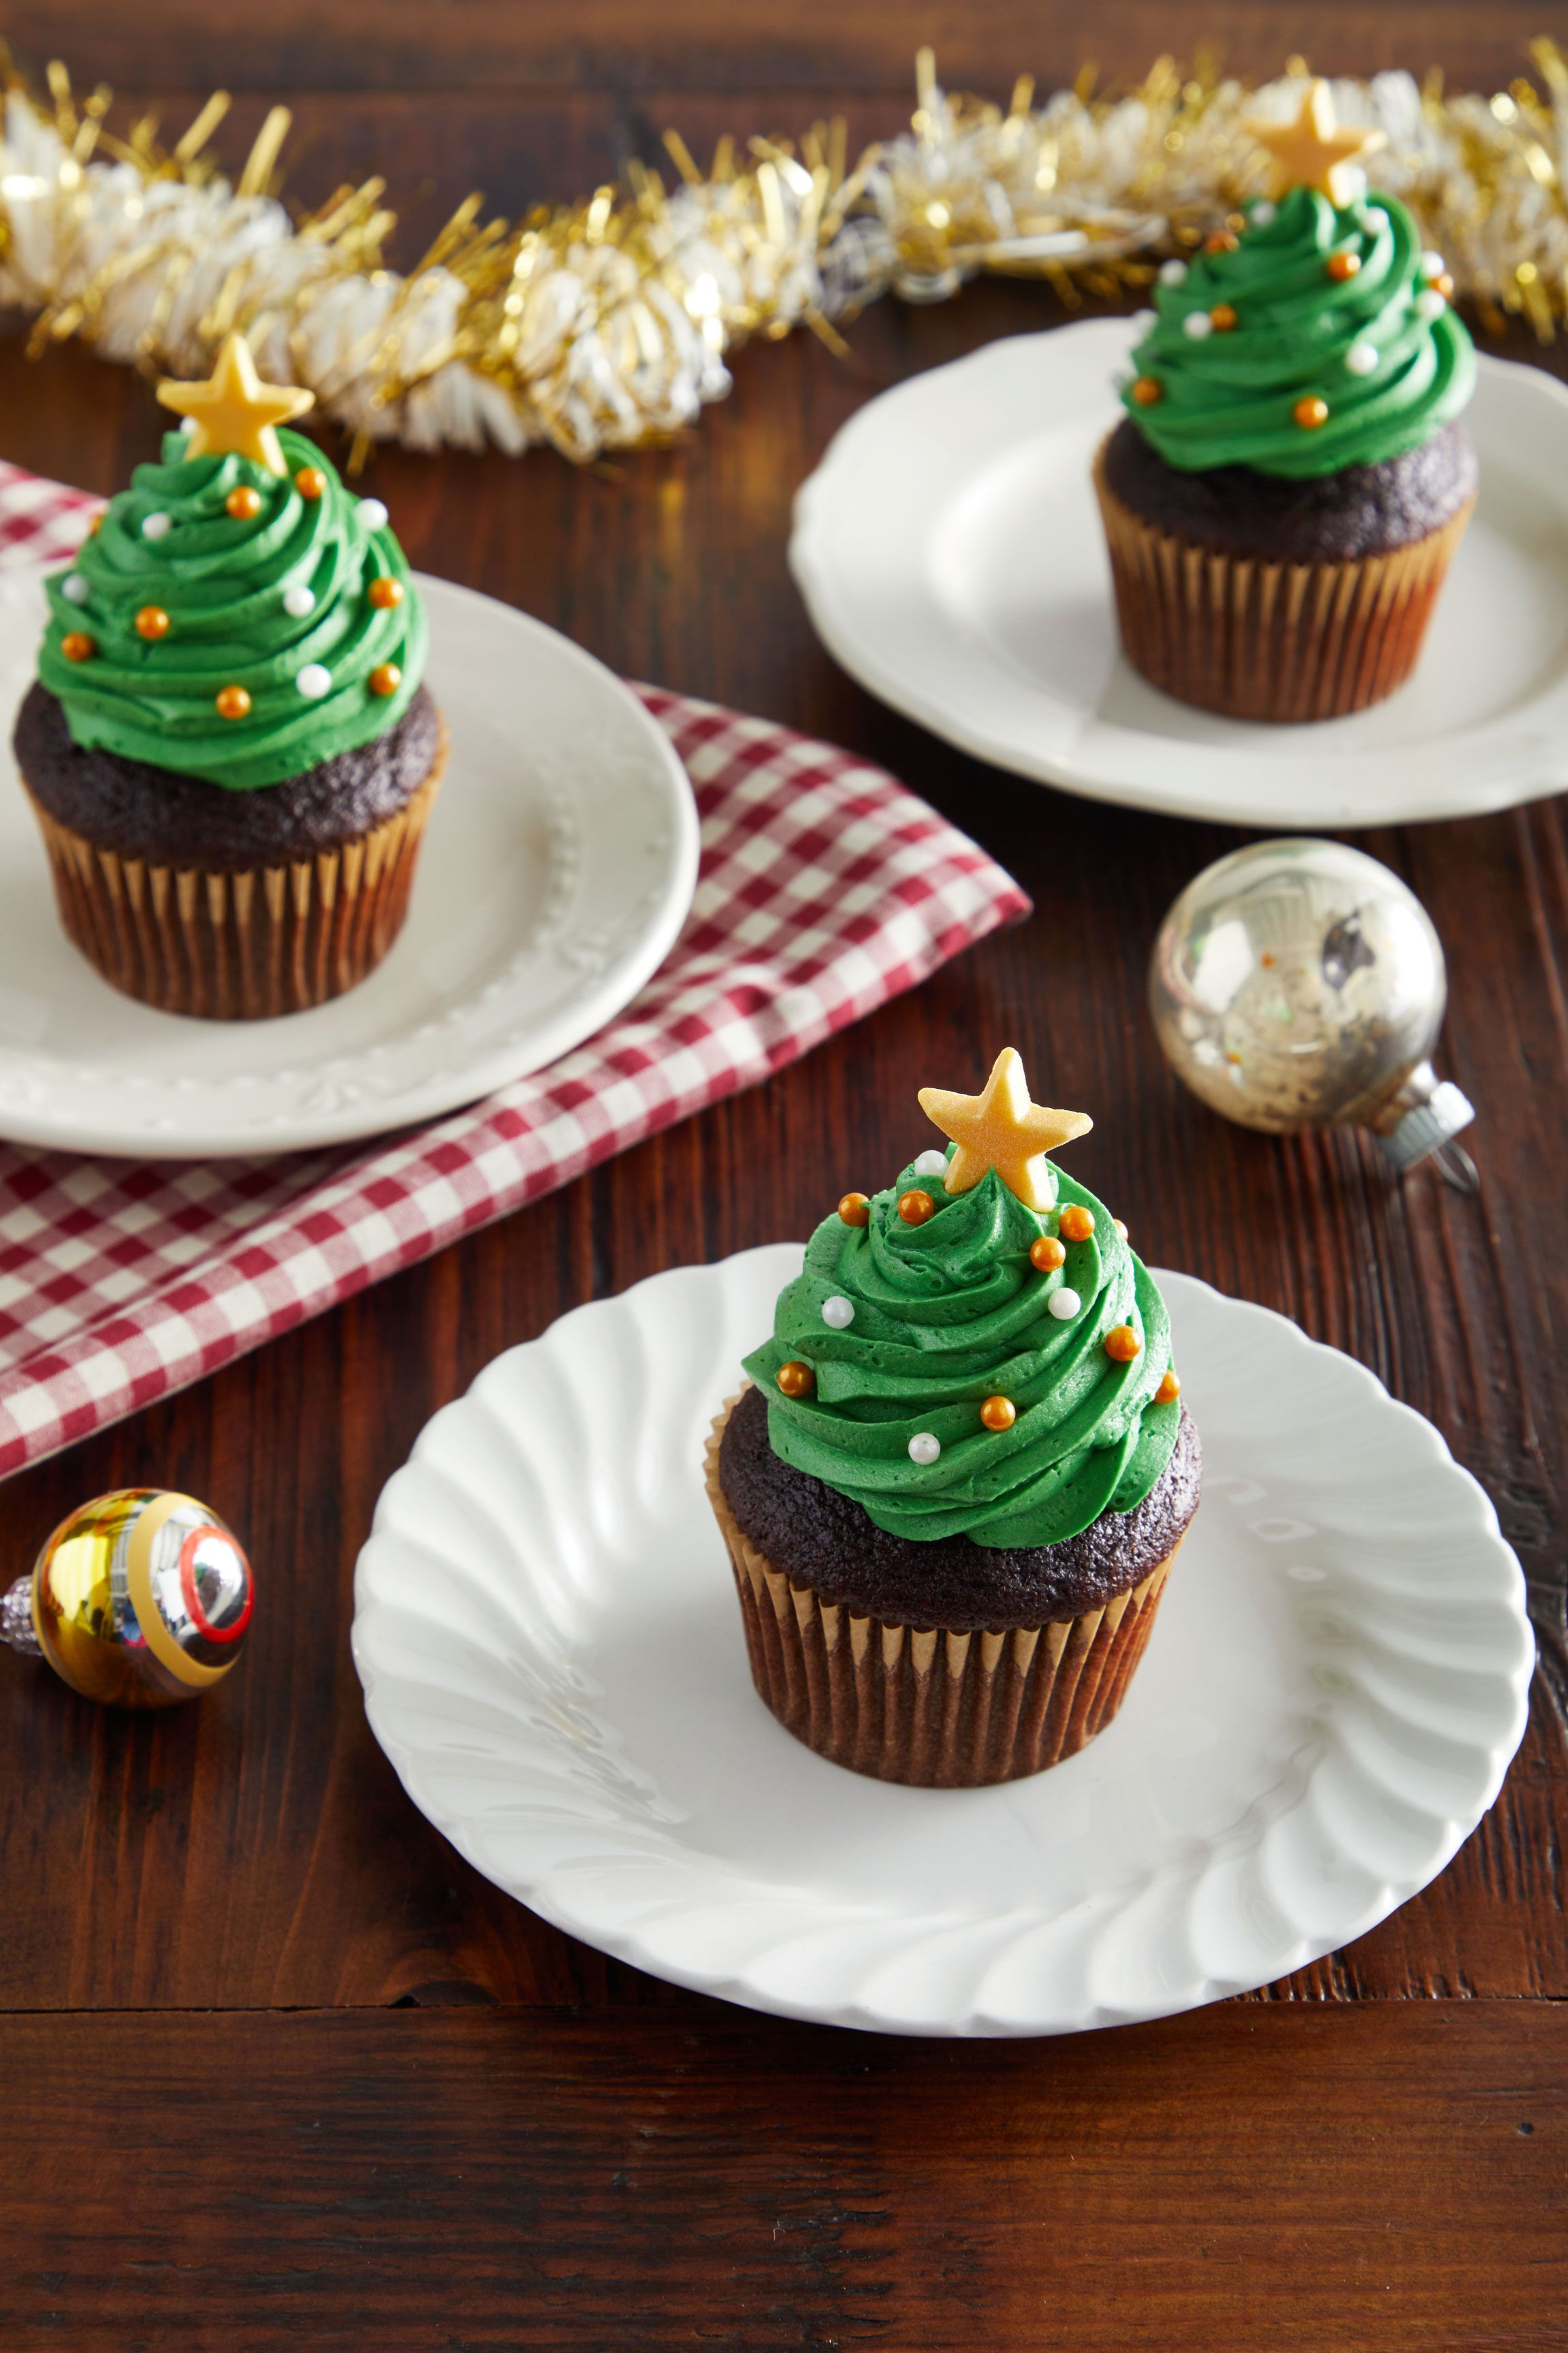 How to Make a Christmas Tree Cake Out of Cupcakes